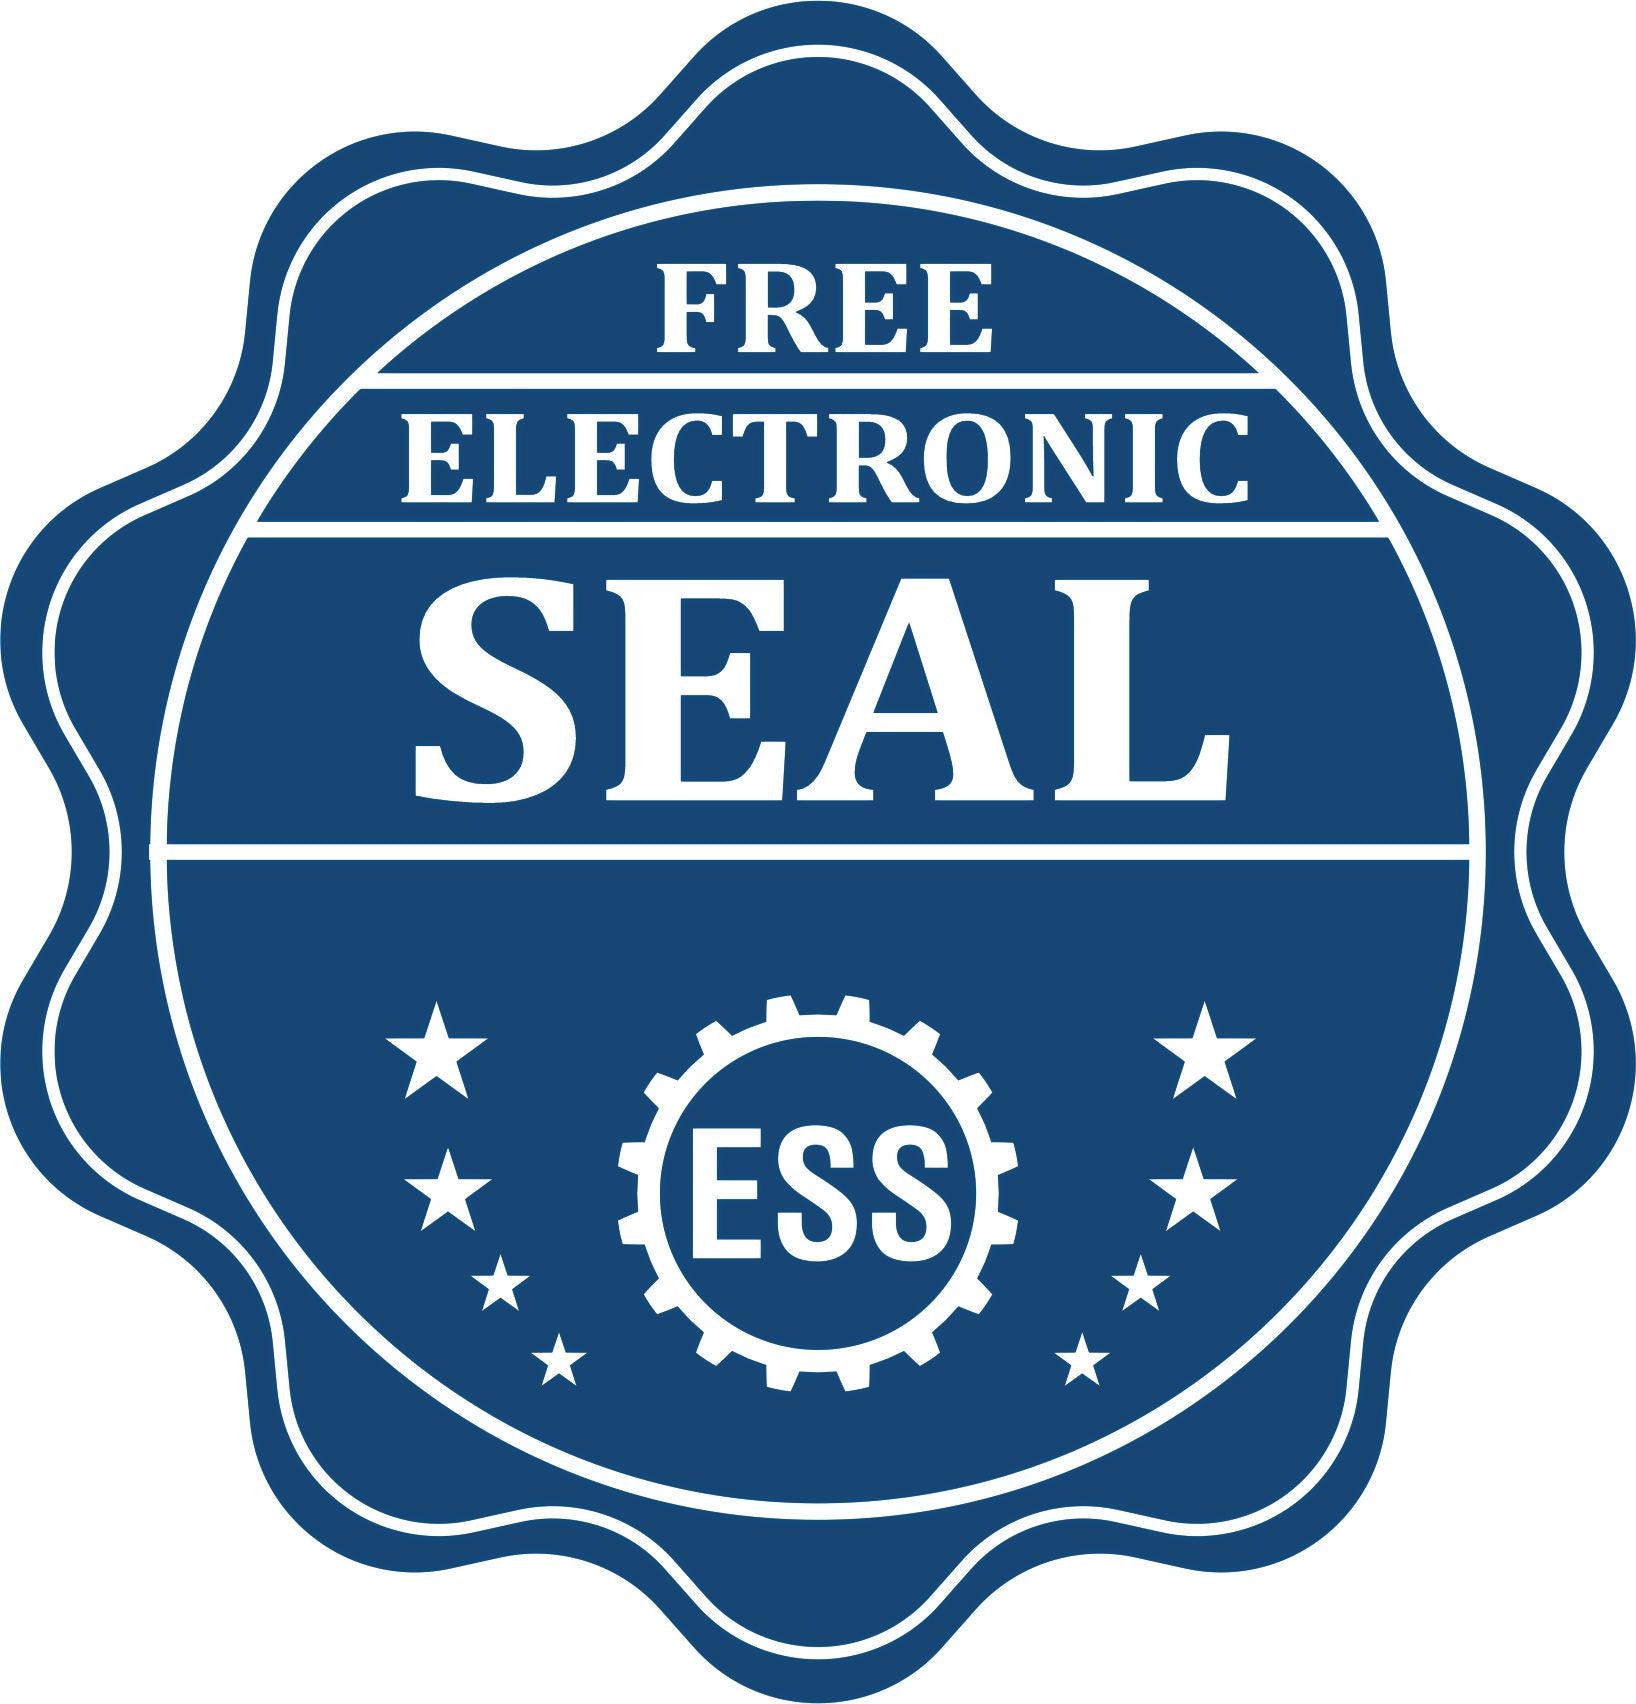 A badge showing a free electronic seal for the Soft Michigan Professional Geologist Seal with stars and the ESS gear on the emblem.